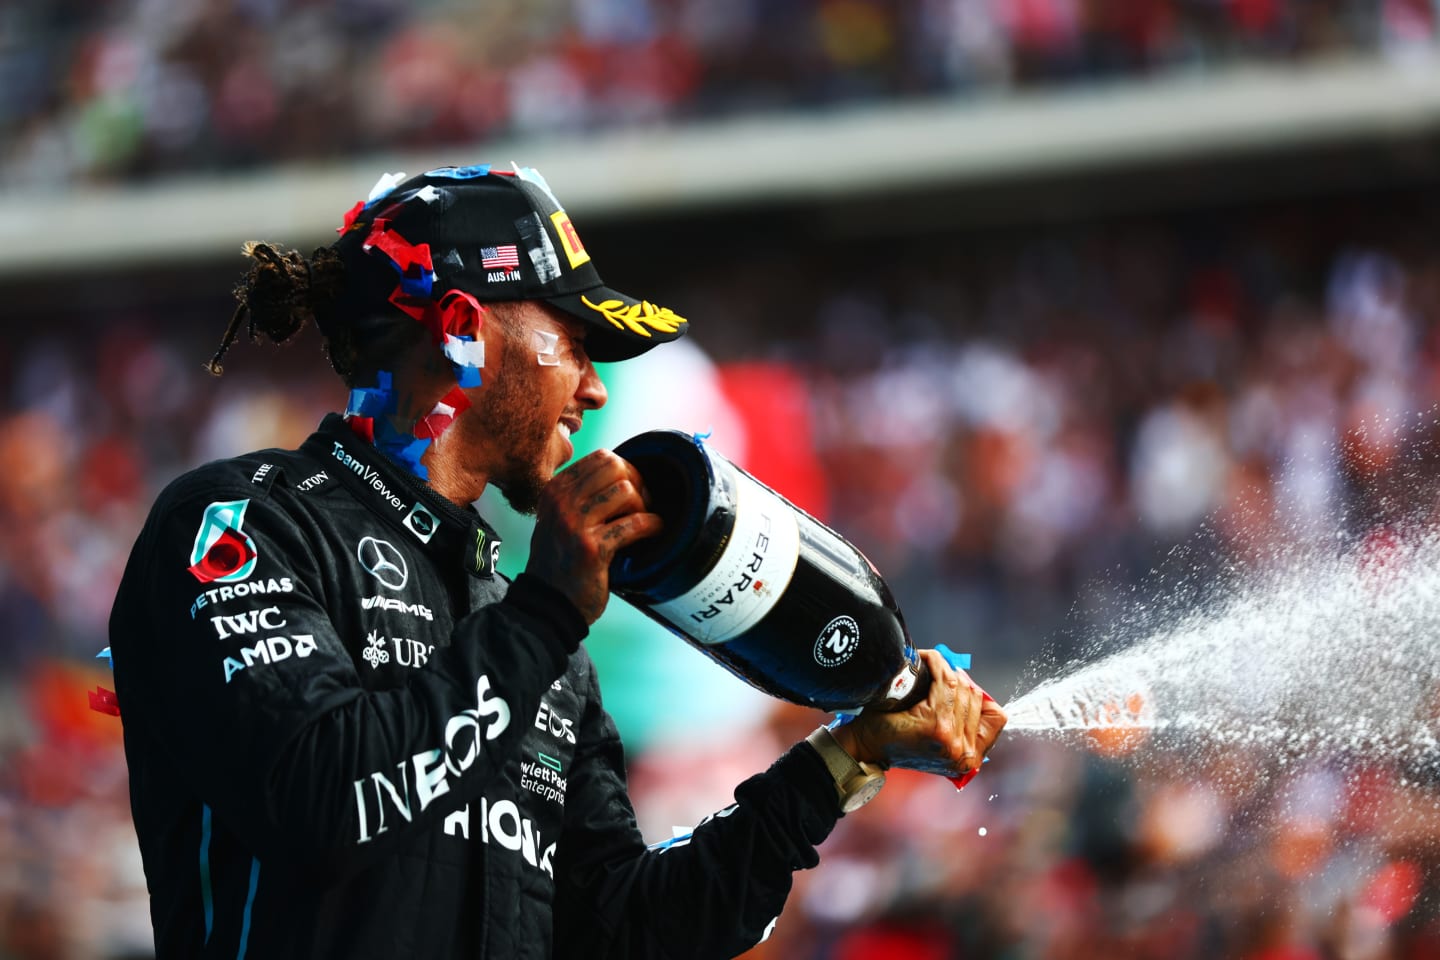 AUSTIN, TEXAS - OCTOBER 23: Second placed Lewis Hamilton of Great Britain and Mercedes celebrates on the podium following the F1 Grand Prix of USA at Circuit of The Americas on October 23, 2022 in Austin, Texas. (Photo by Dan Istitene - Formula 1/Formula 1 via Getty Images)